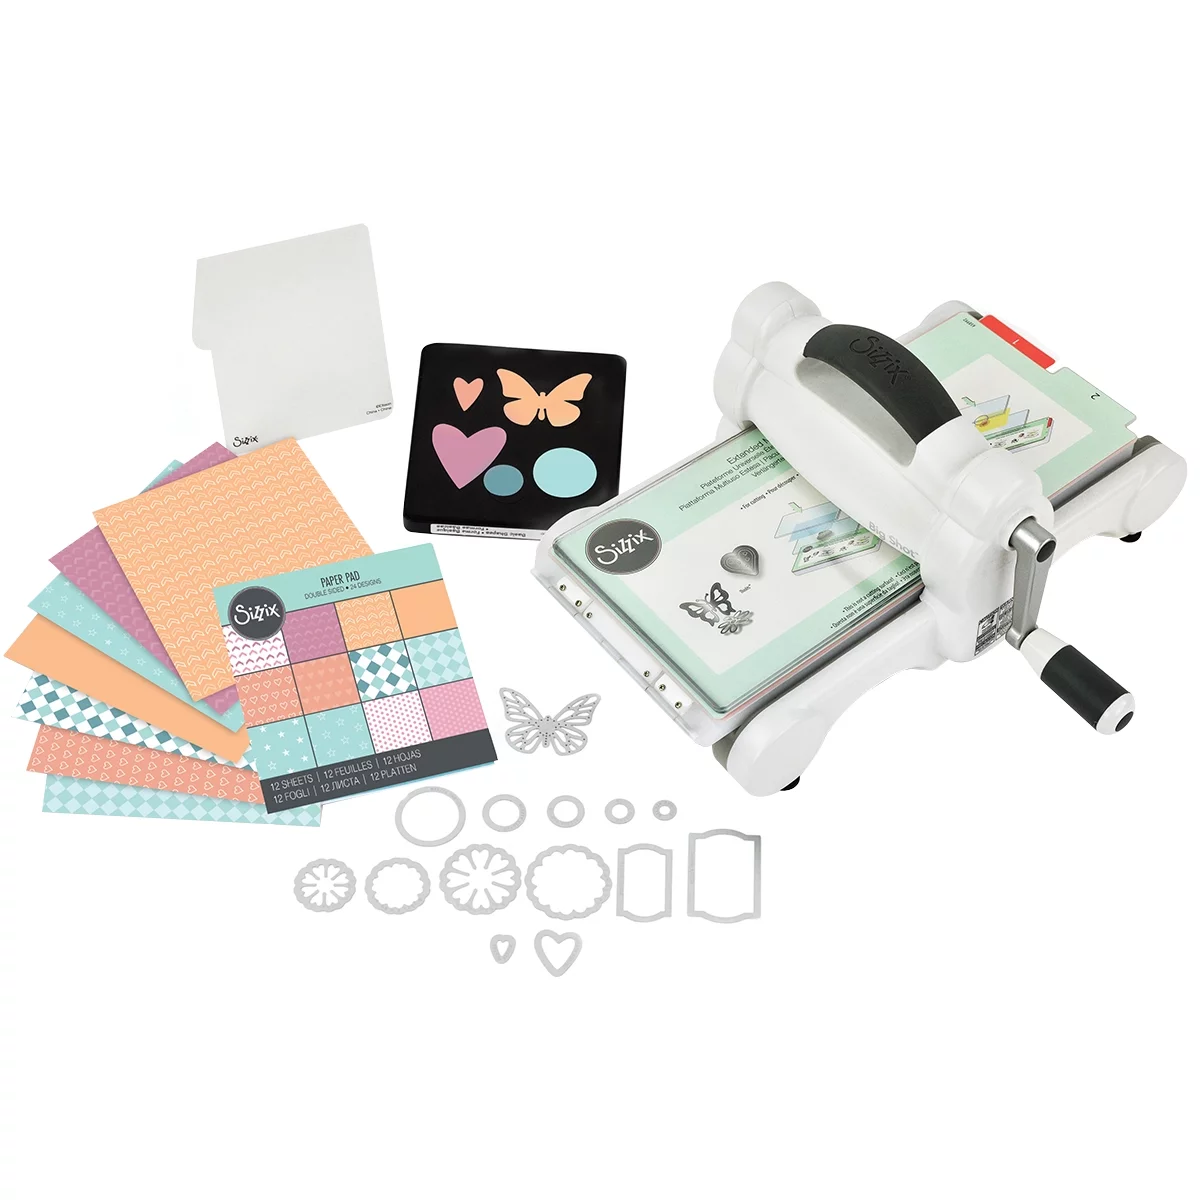 Sizzix Big Shot Die-Cut Machine Starter Kit with Paper - Manual Die Cutting & Embossing Machine for Arts & Crafts, Scrapbooking & Cardmaking, 6" Opening (White & Gray)